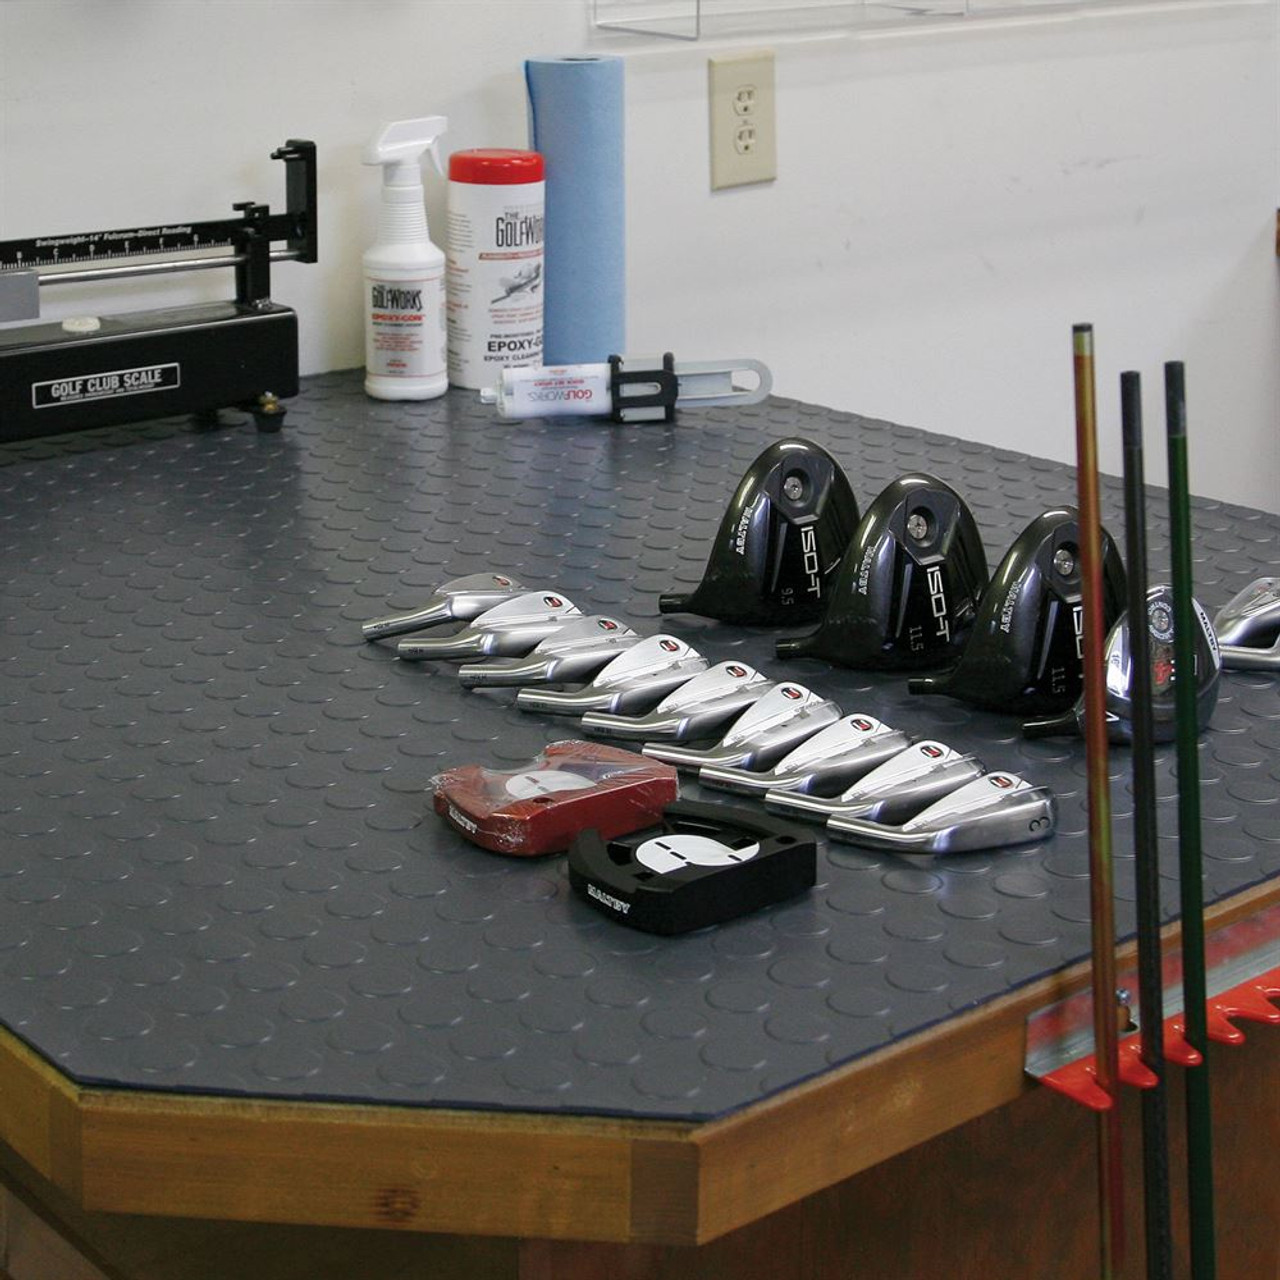 Where to find workbench mats?